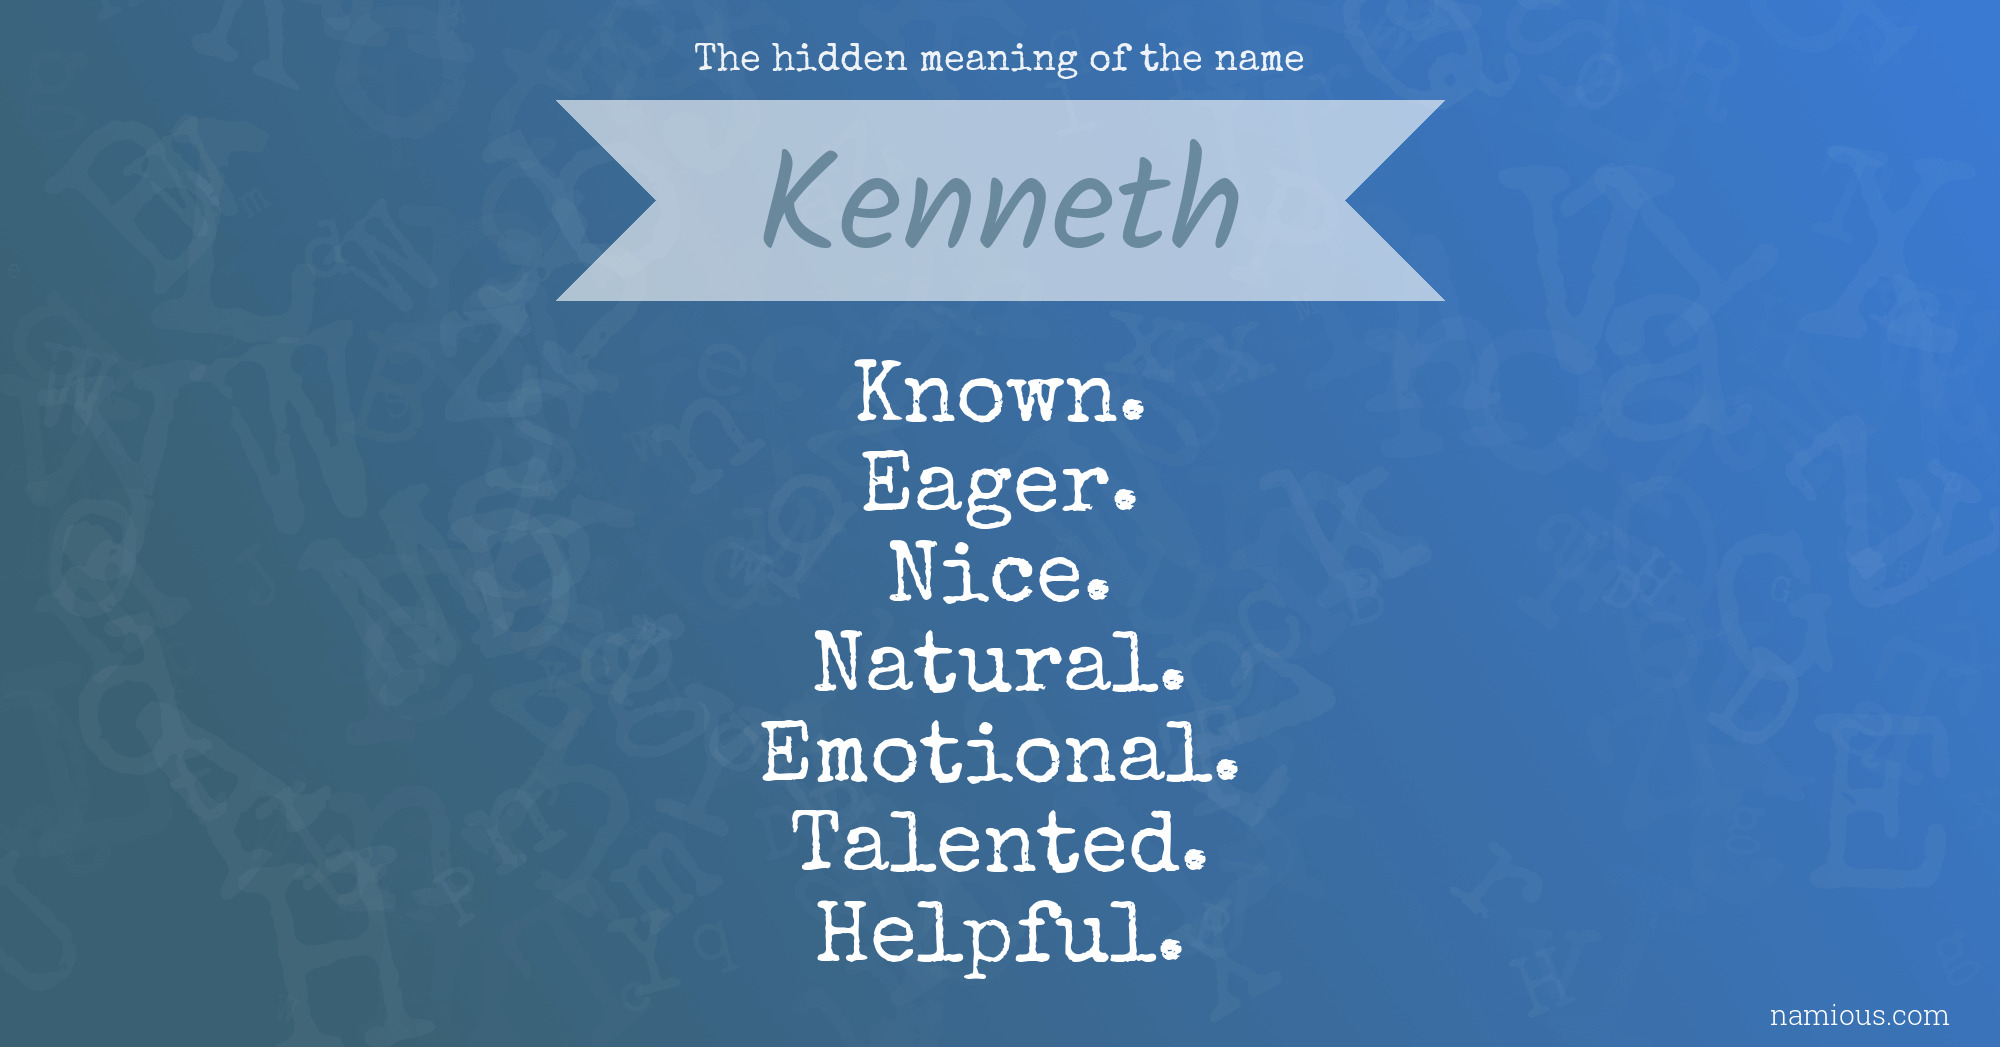 The hidden meaning of the name Kenneth